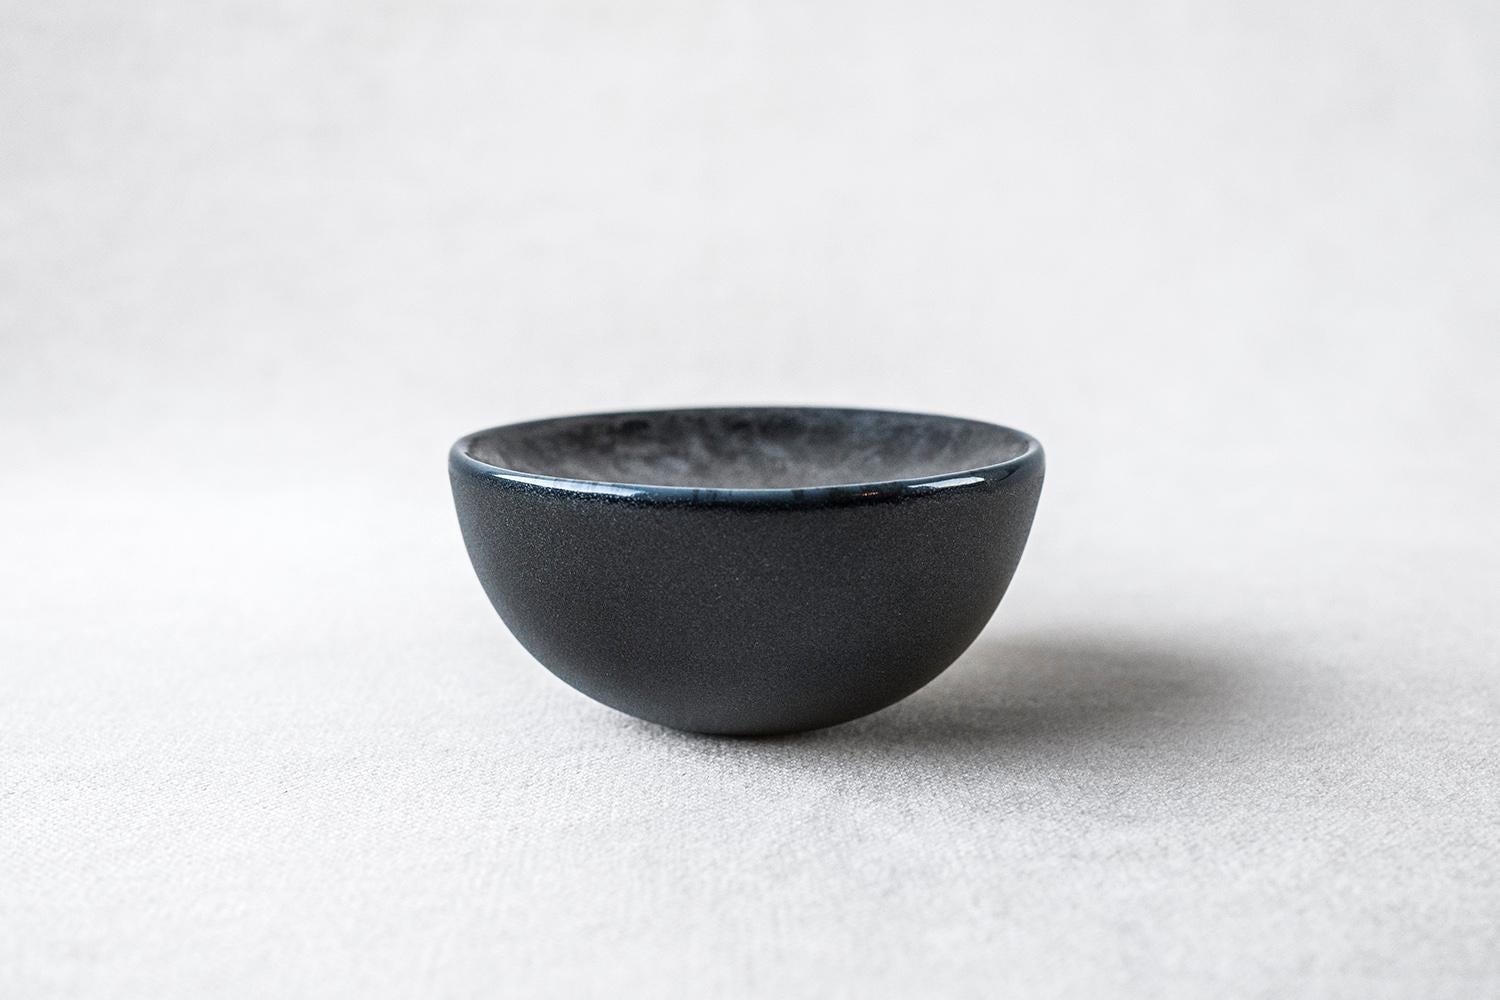 • Set of 2 x small porcelain side dishes
• 7,5 cm ø x 3,5 cm
• Perfect for a sexy amuse-bouche, a pre-dessert or side dish
• Also works for the essential coarse sea salt on the table
• Hand painted deep grey surface
• Designed in Amsterdam /